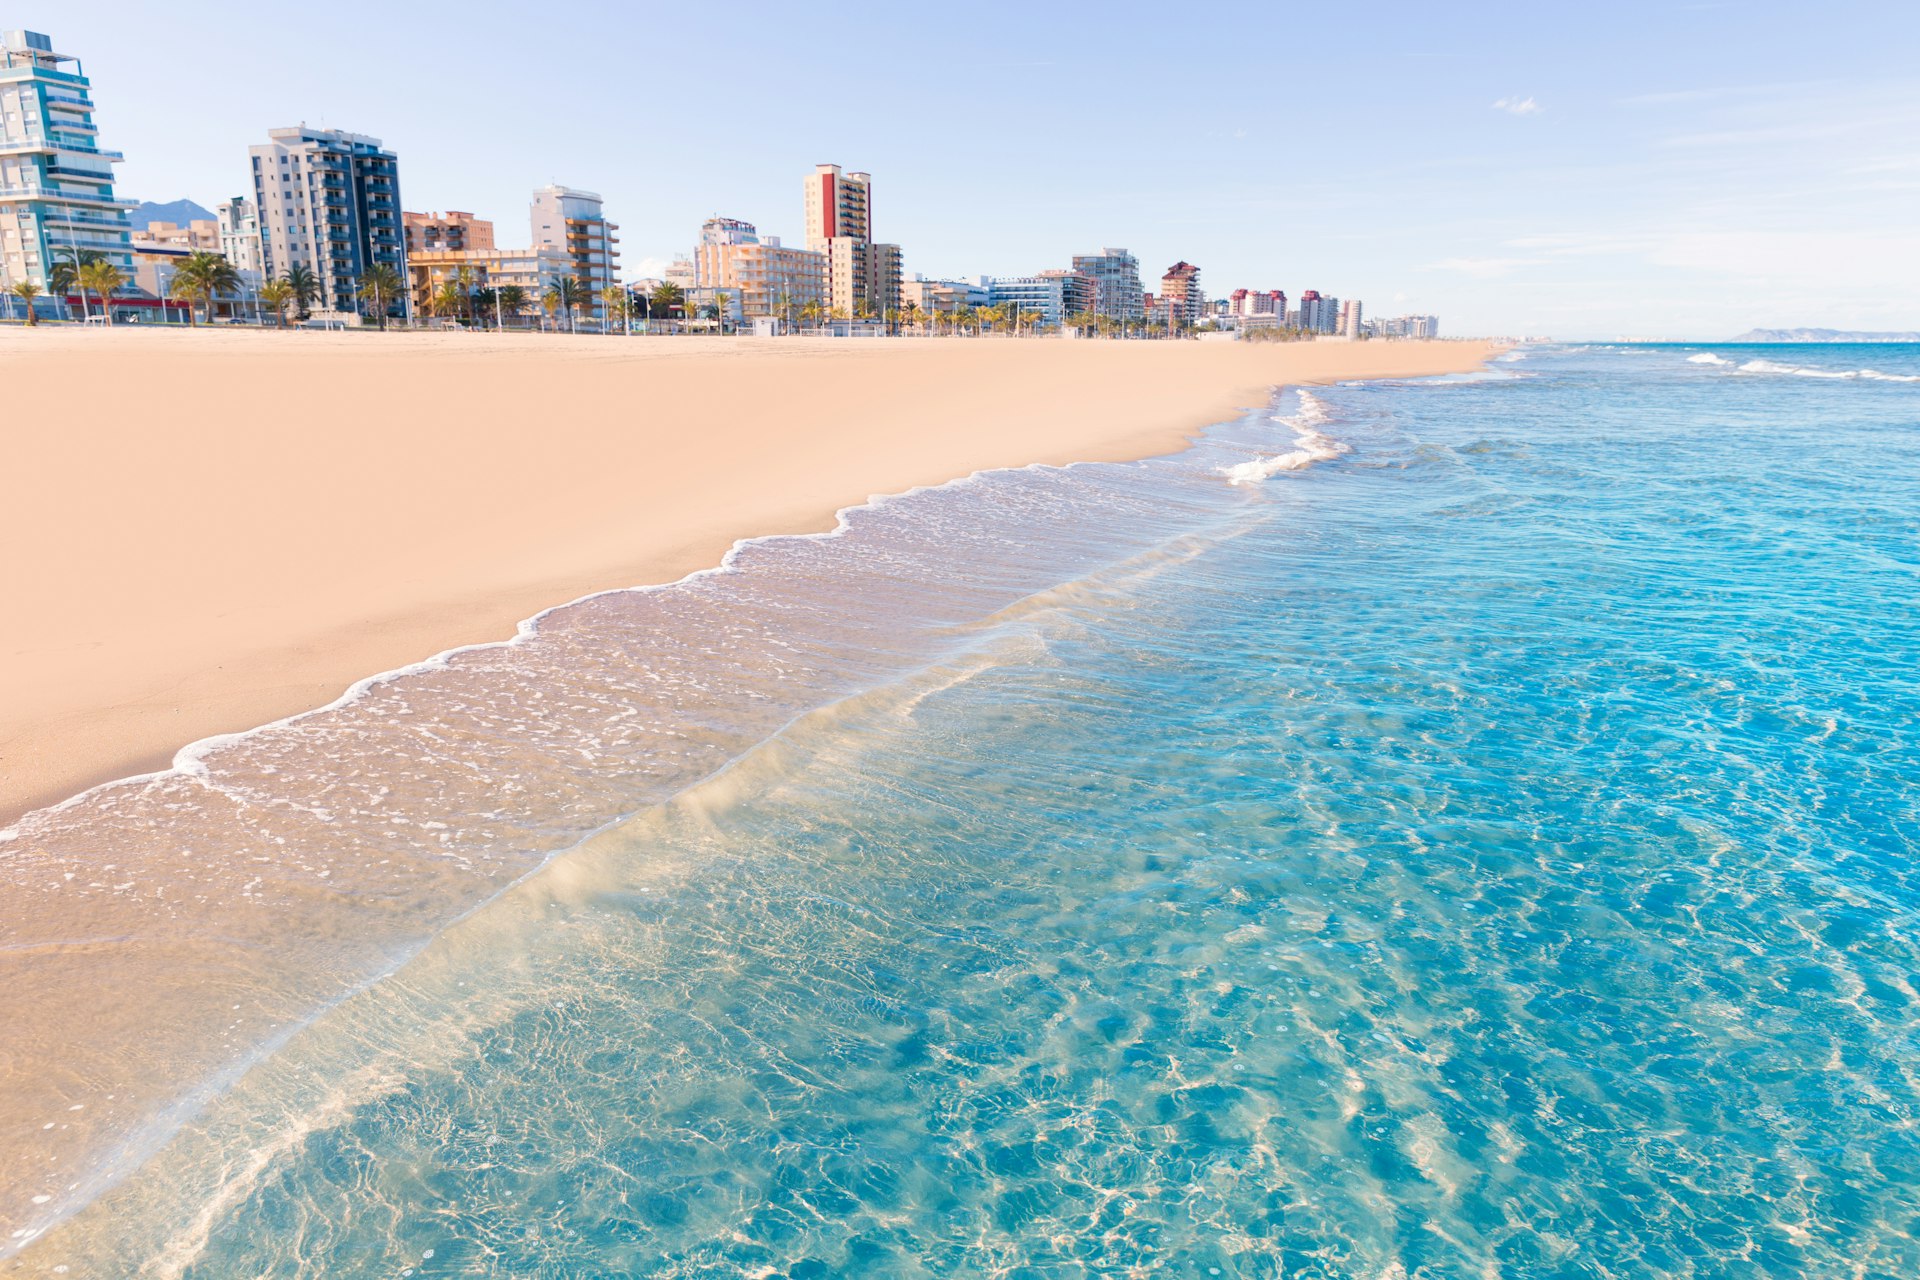 The clear, blue wash of the Mediterranean Sea cuts diagonally against the soft, pinkish sands of Playa de Gandia in Valencia, Spain with several tower blocks rising up in the background